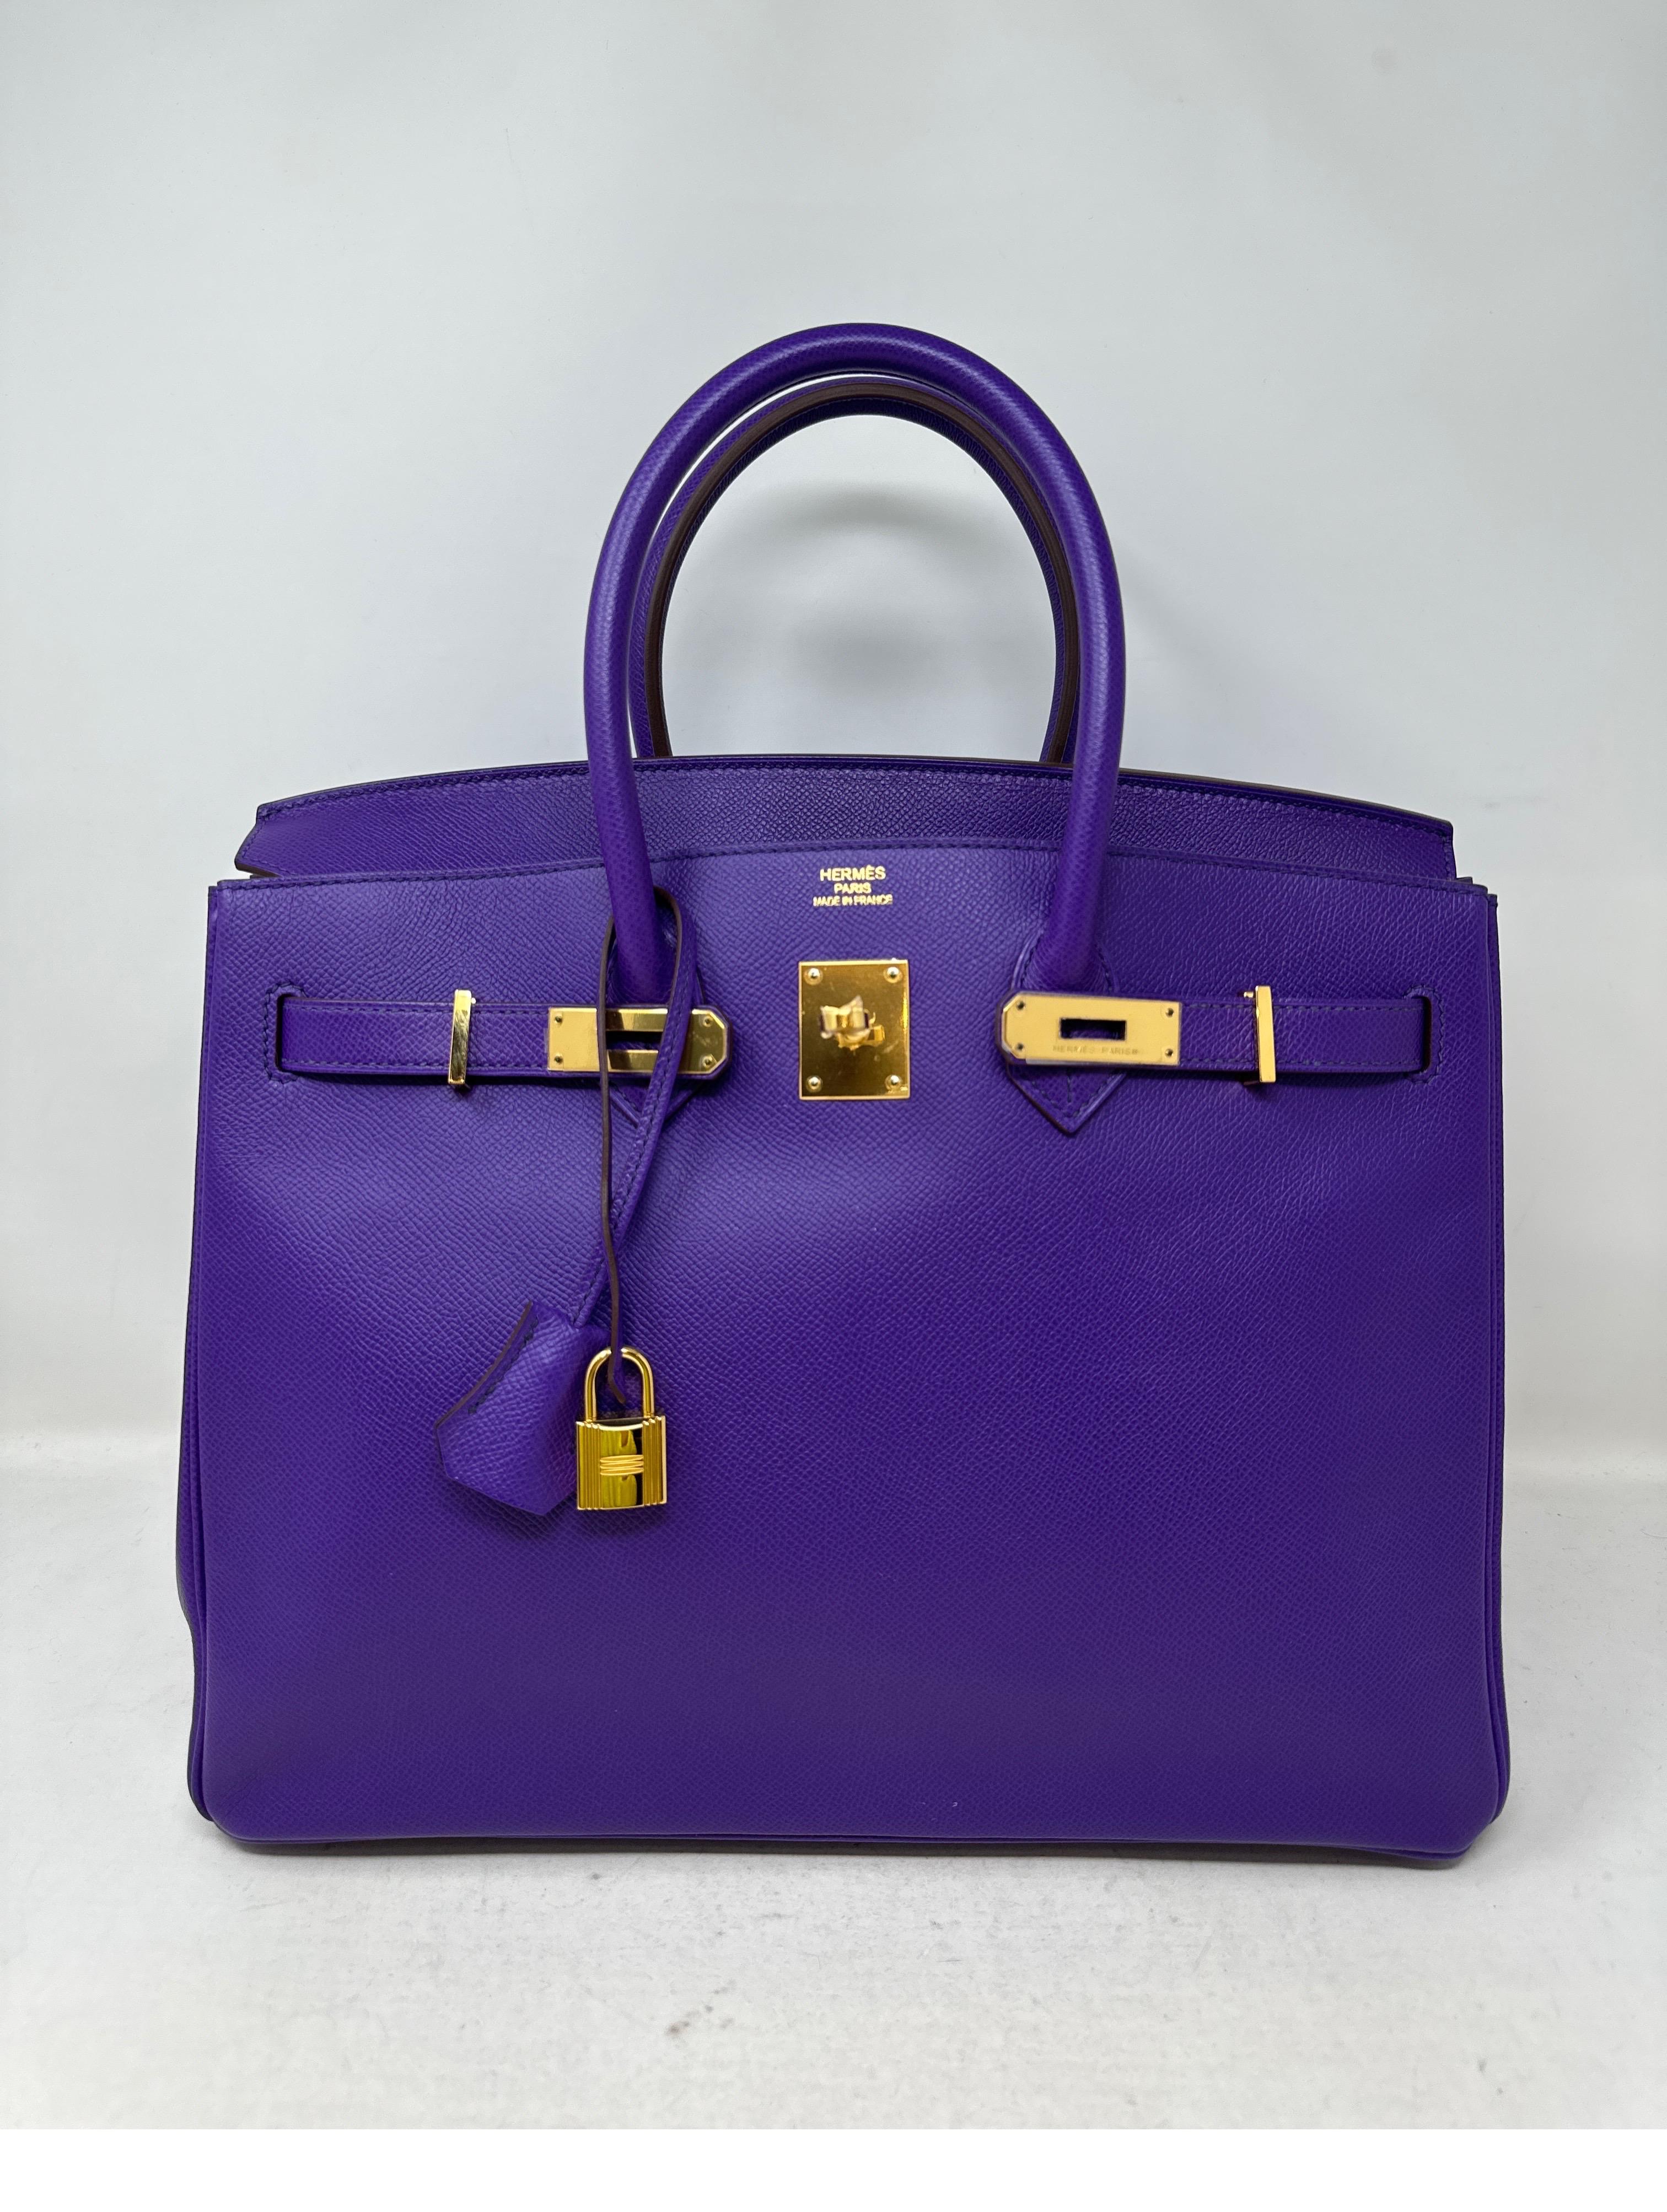 Hermes Ultra Violet Birkin 35 Bag. Gorgeous vibrant purple color Birkin. Gold hardware. Excellent condition. Epsom leather. Looks like new condition. Still has plastic on hardware. Hard to find combo. Interior clean. Stayed in the dust cover.